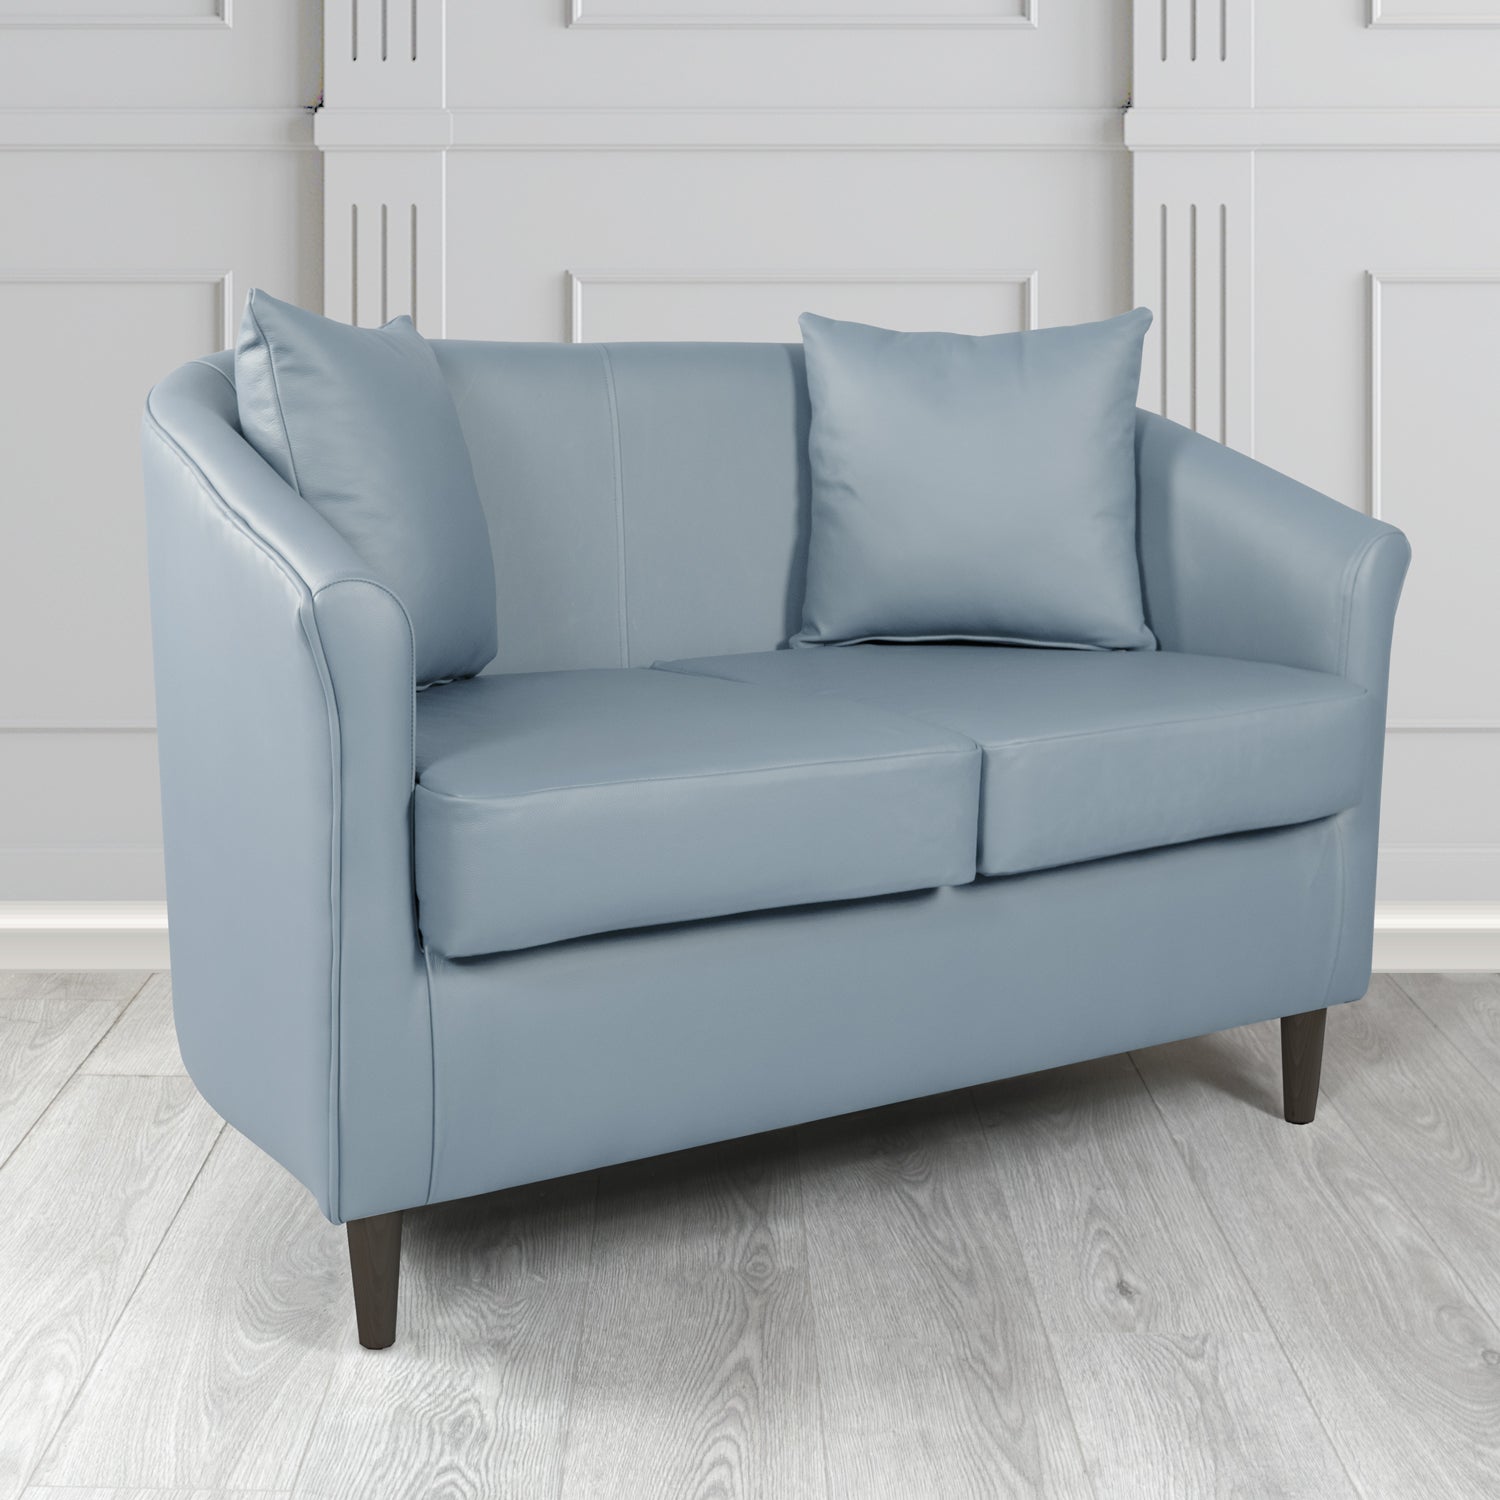 St Tropez Shelly Iceblast Crib 5 Genuine Leather 2 Seater Tub Sofa with Scatter Cushions - The Tub Chair Shop